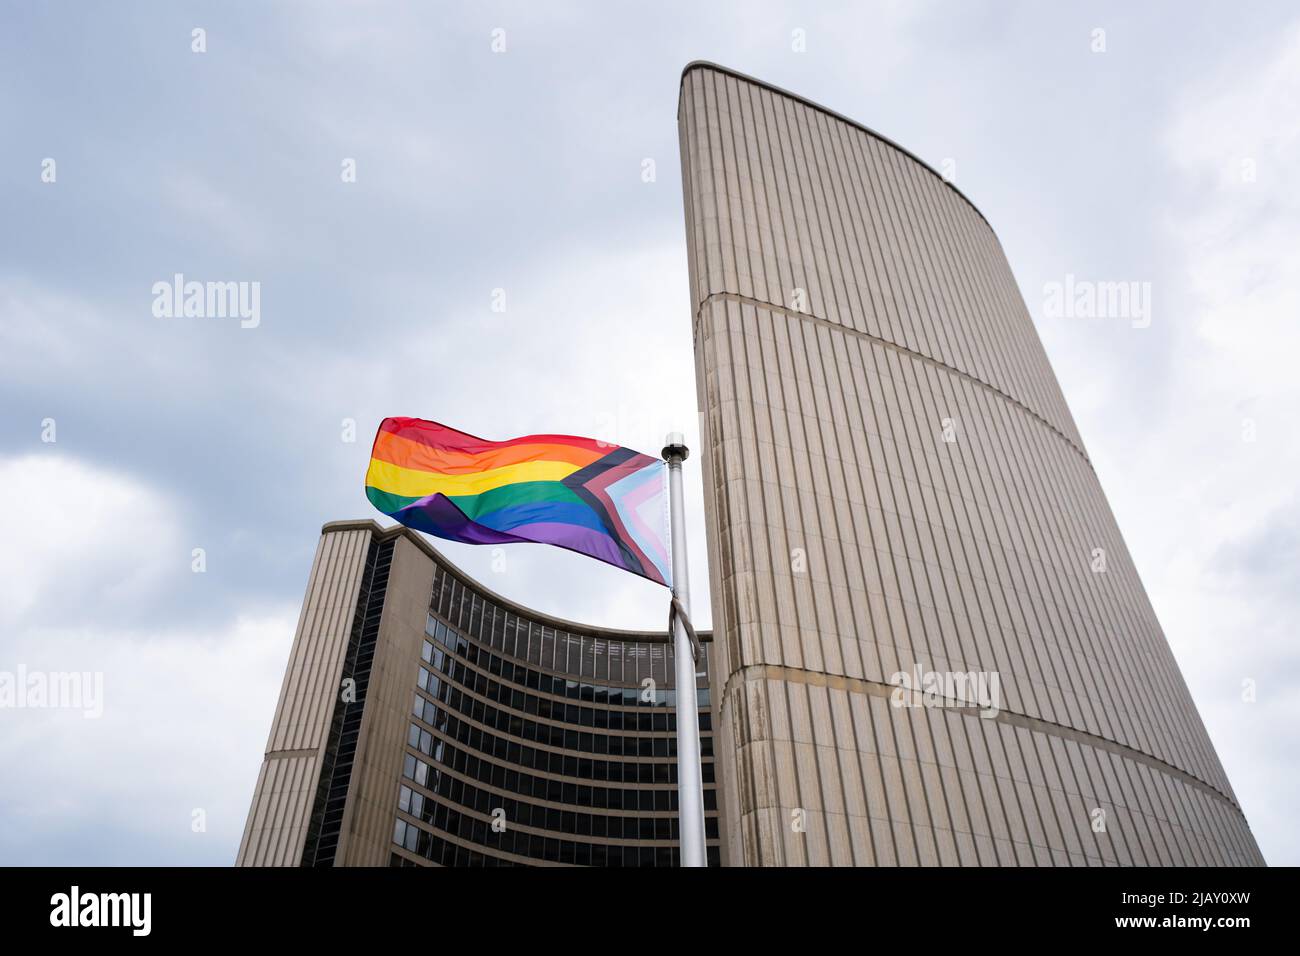 The 'Progress' Pride flag flies for the first time at Toronto's City Hall for Pride Month 2022. Stock Photo